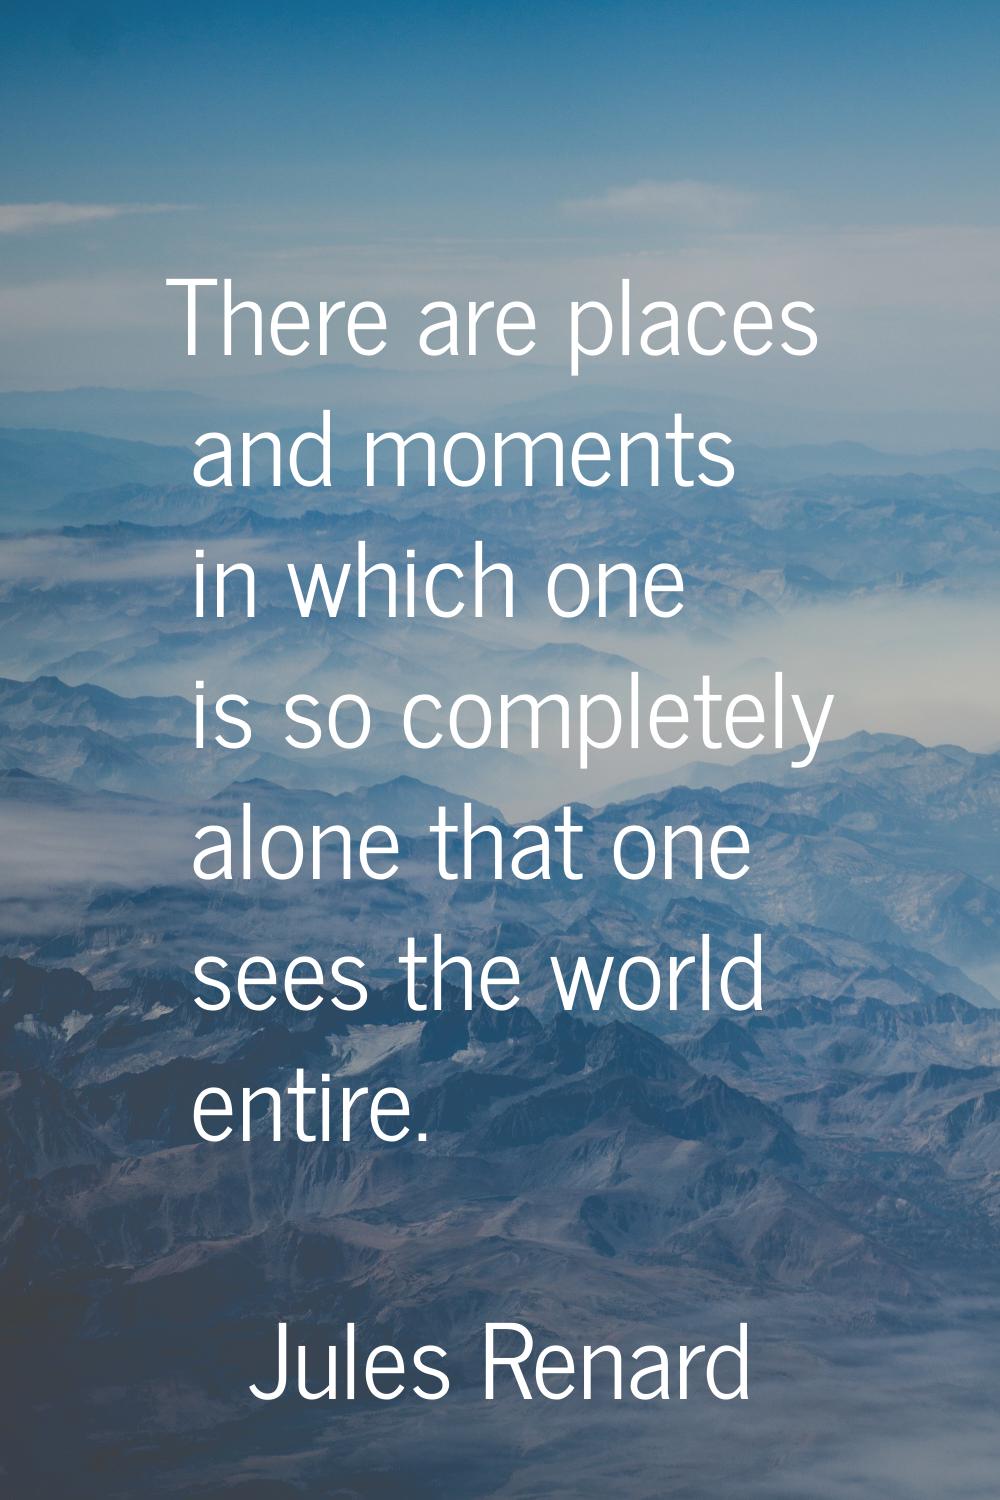 There are places and moments in which one is so completely alone that one sees the world entire.